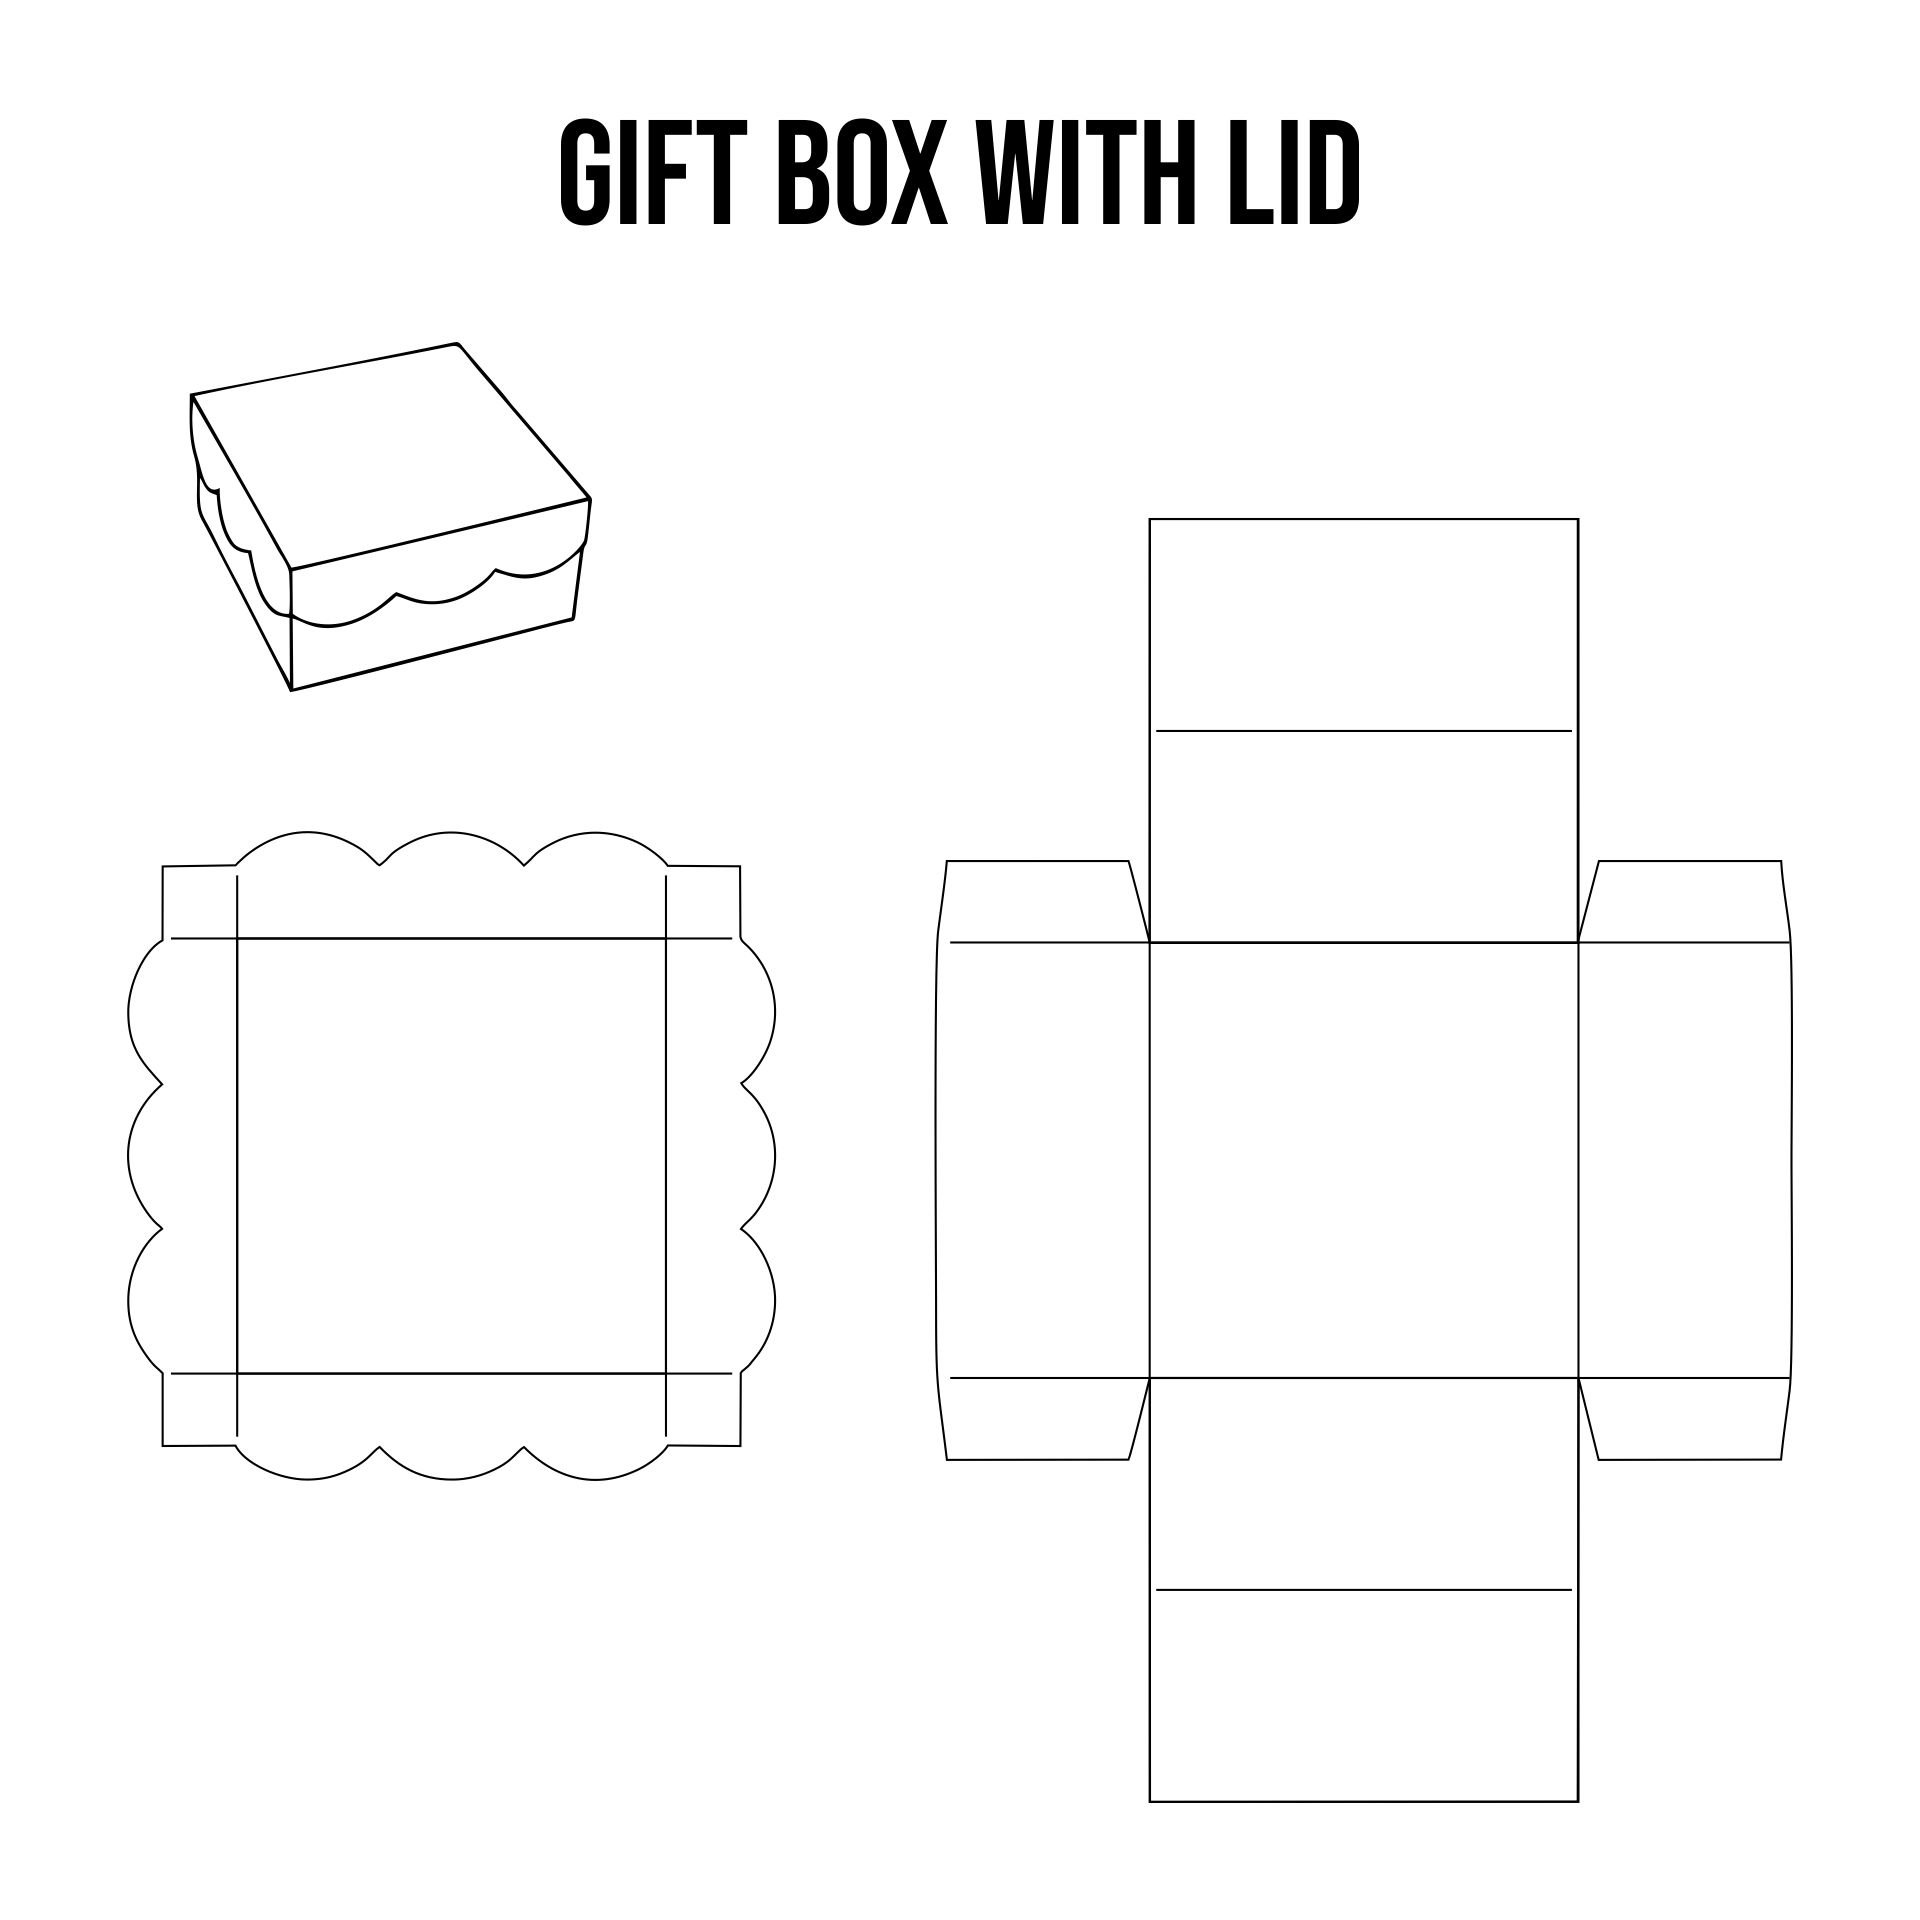 5 Best Images of Gift Box With Lid Template Printables